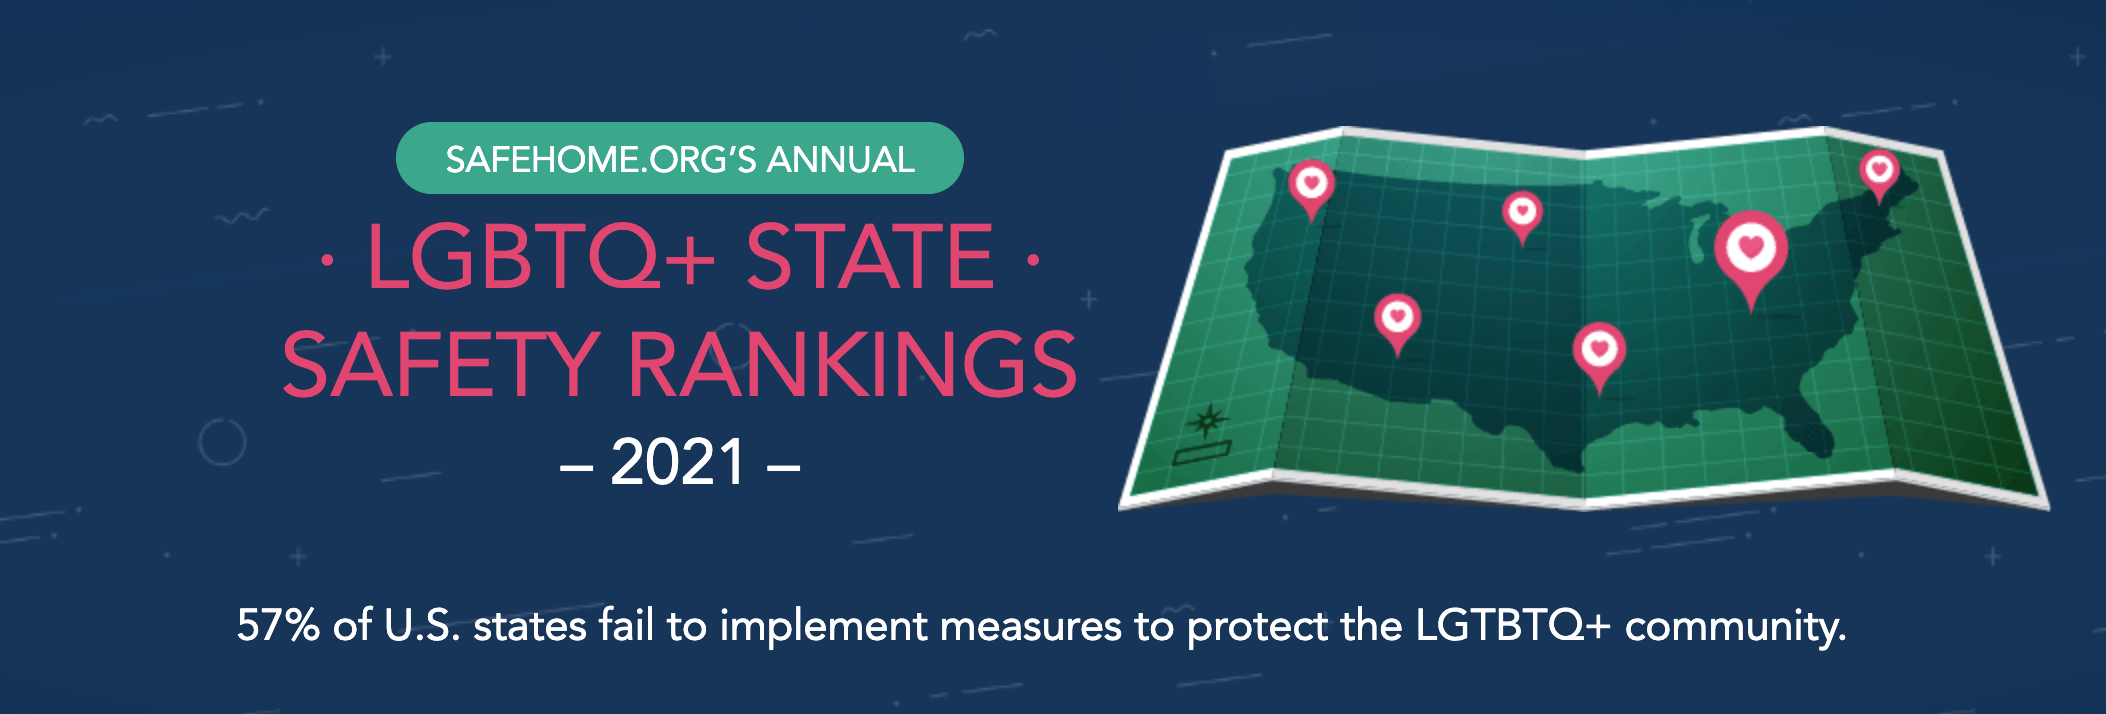 Safehome.org’s Annual LGBTQ+ State Safety Rankings: 2021 Featured Image